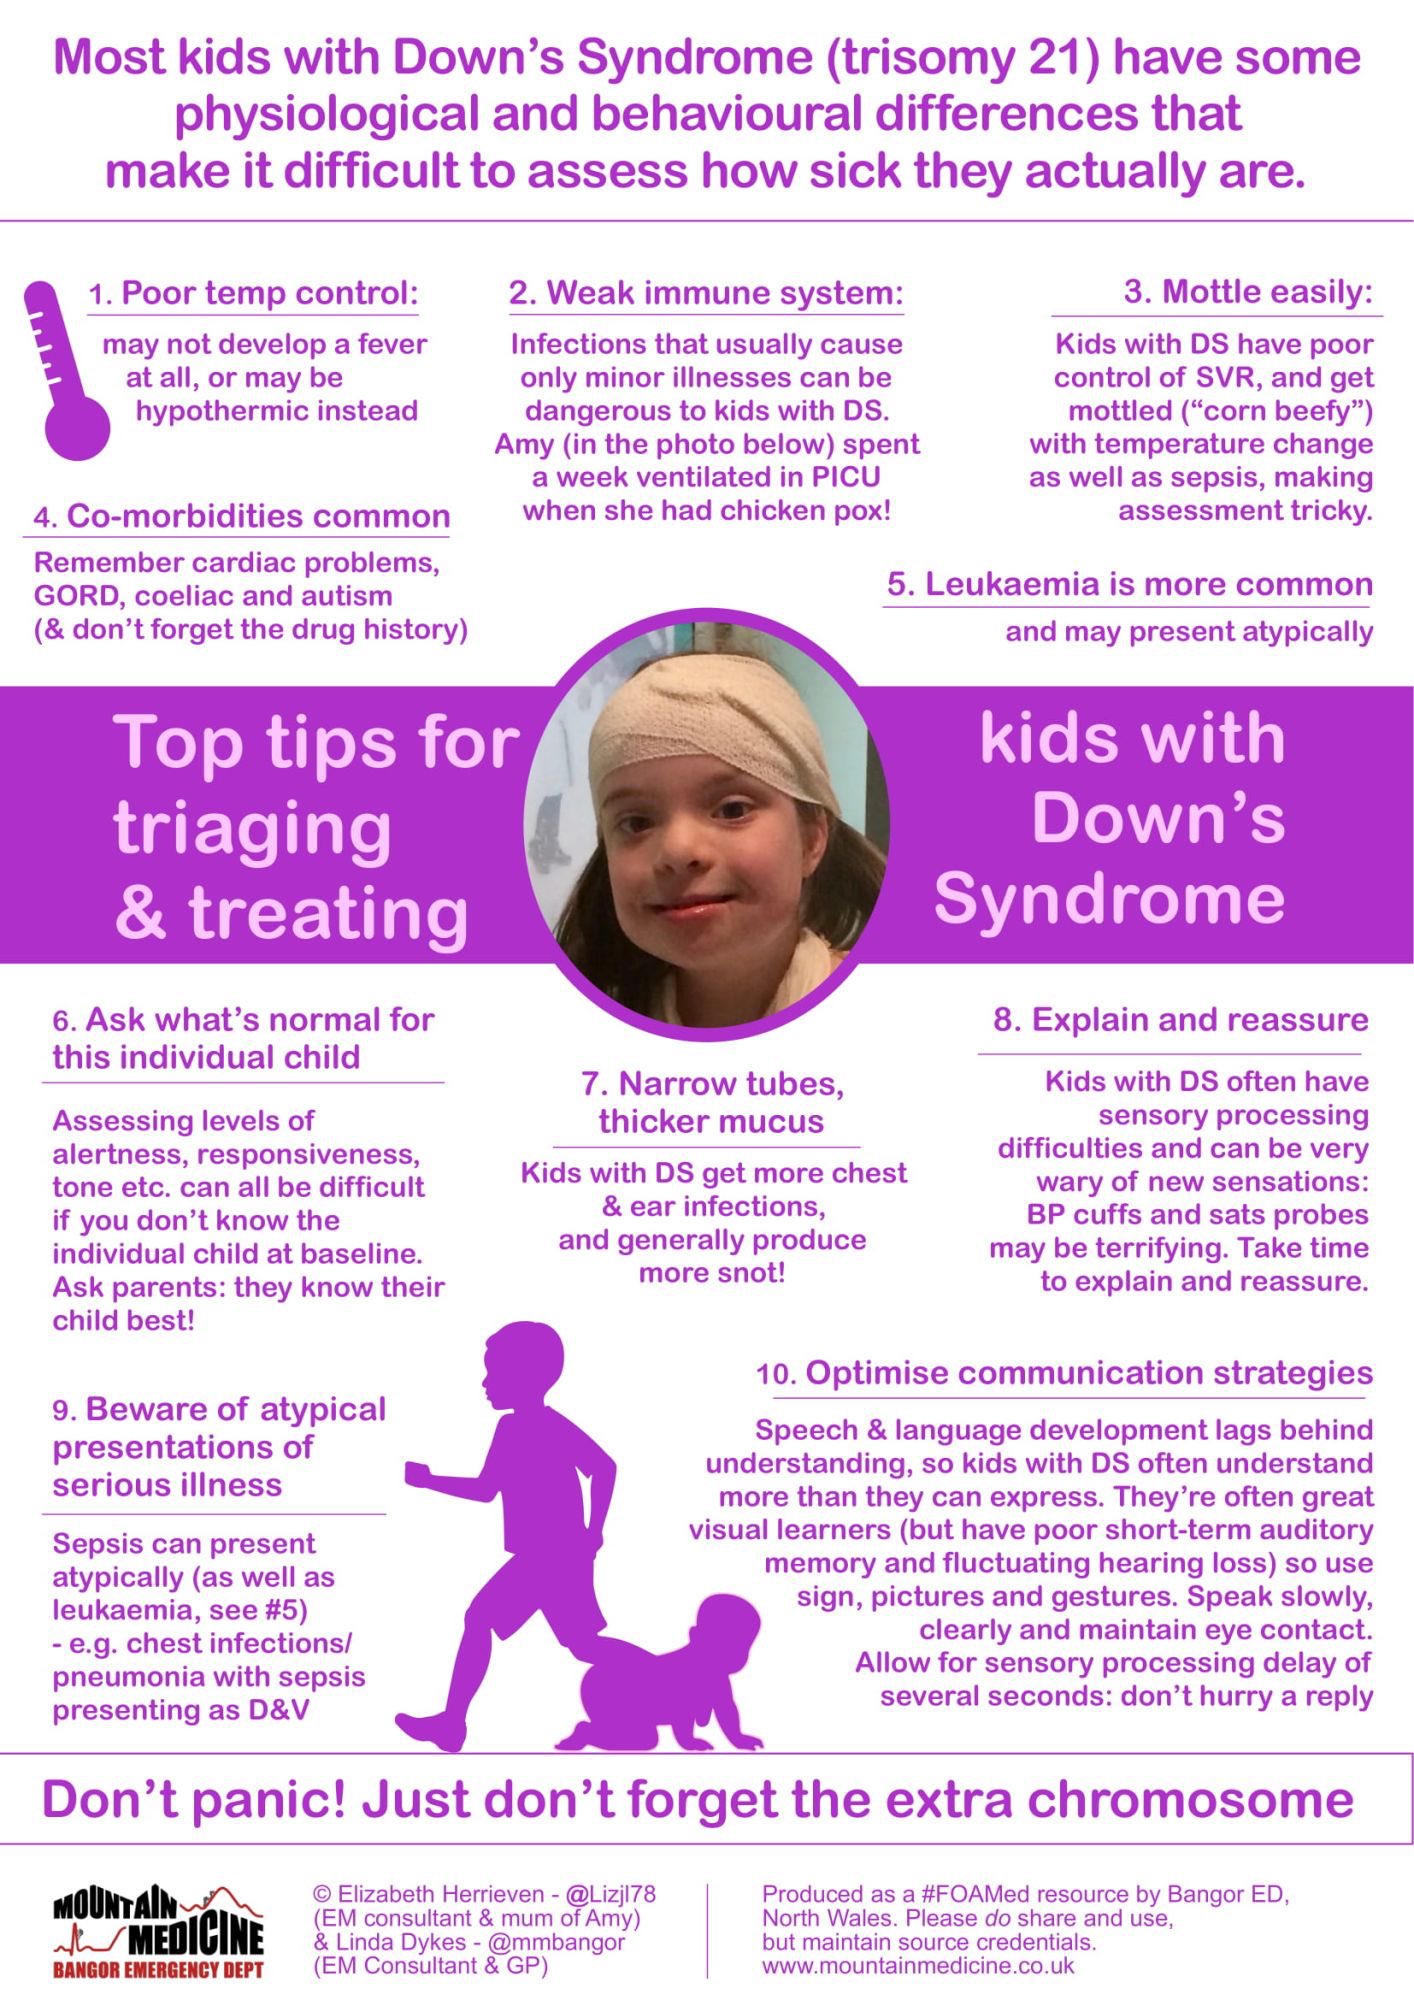 Top Tips For Triaging And Treating Cyp With Downs Syndrome